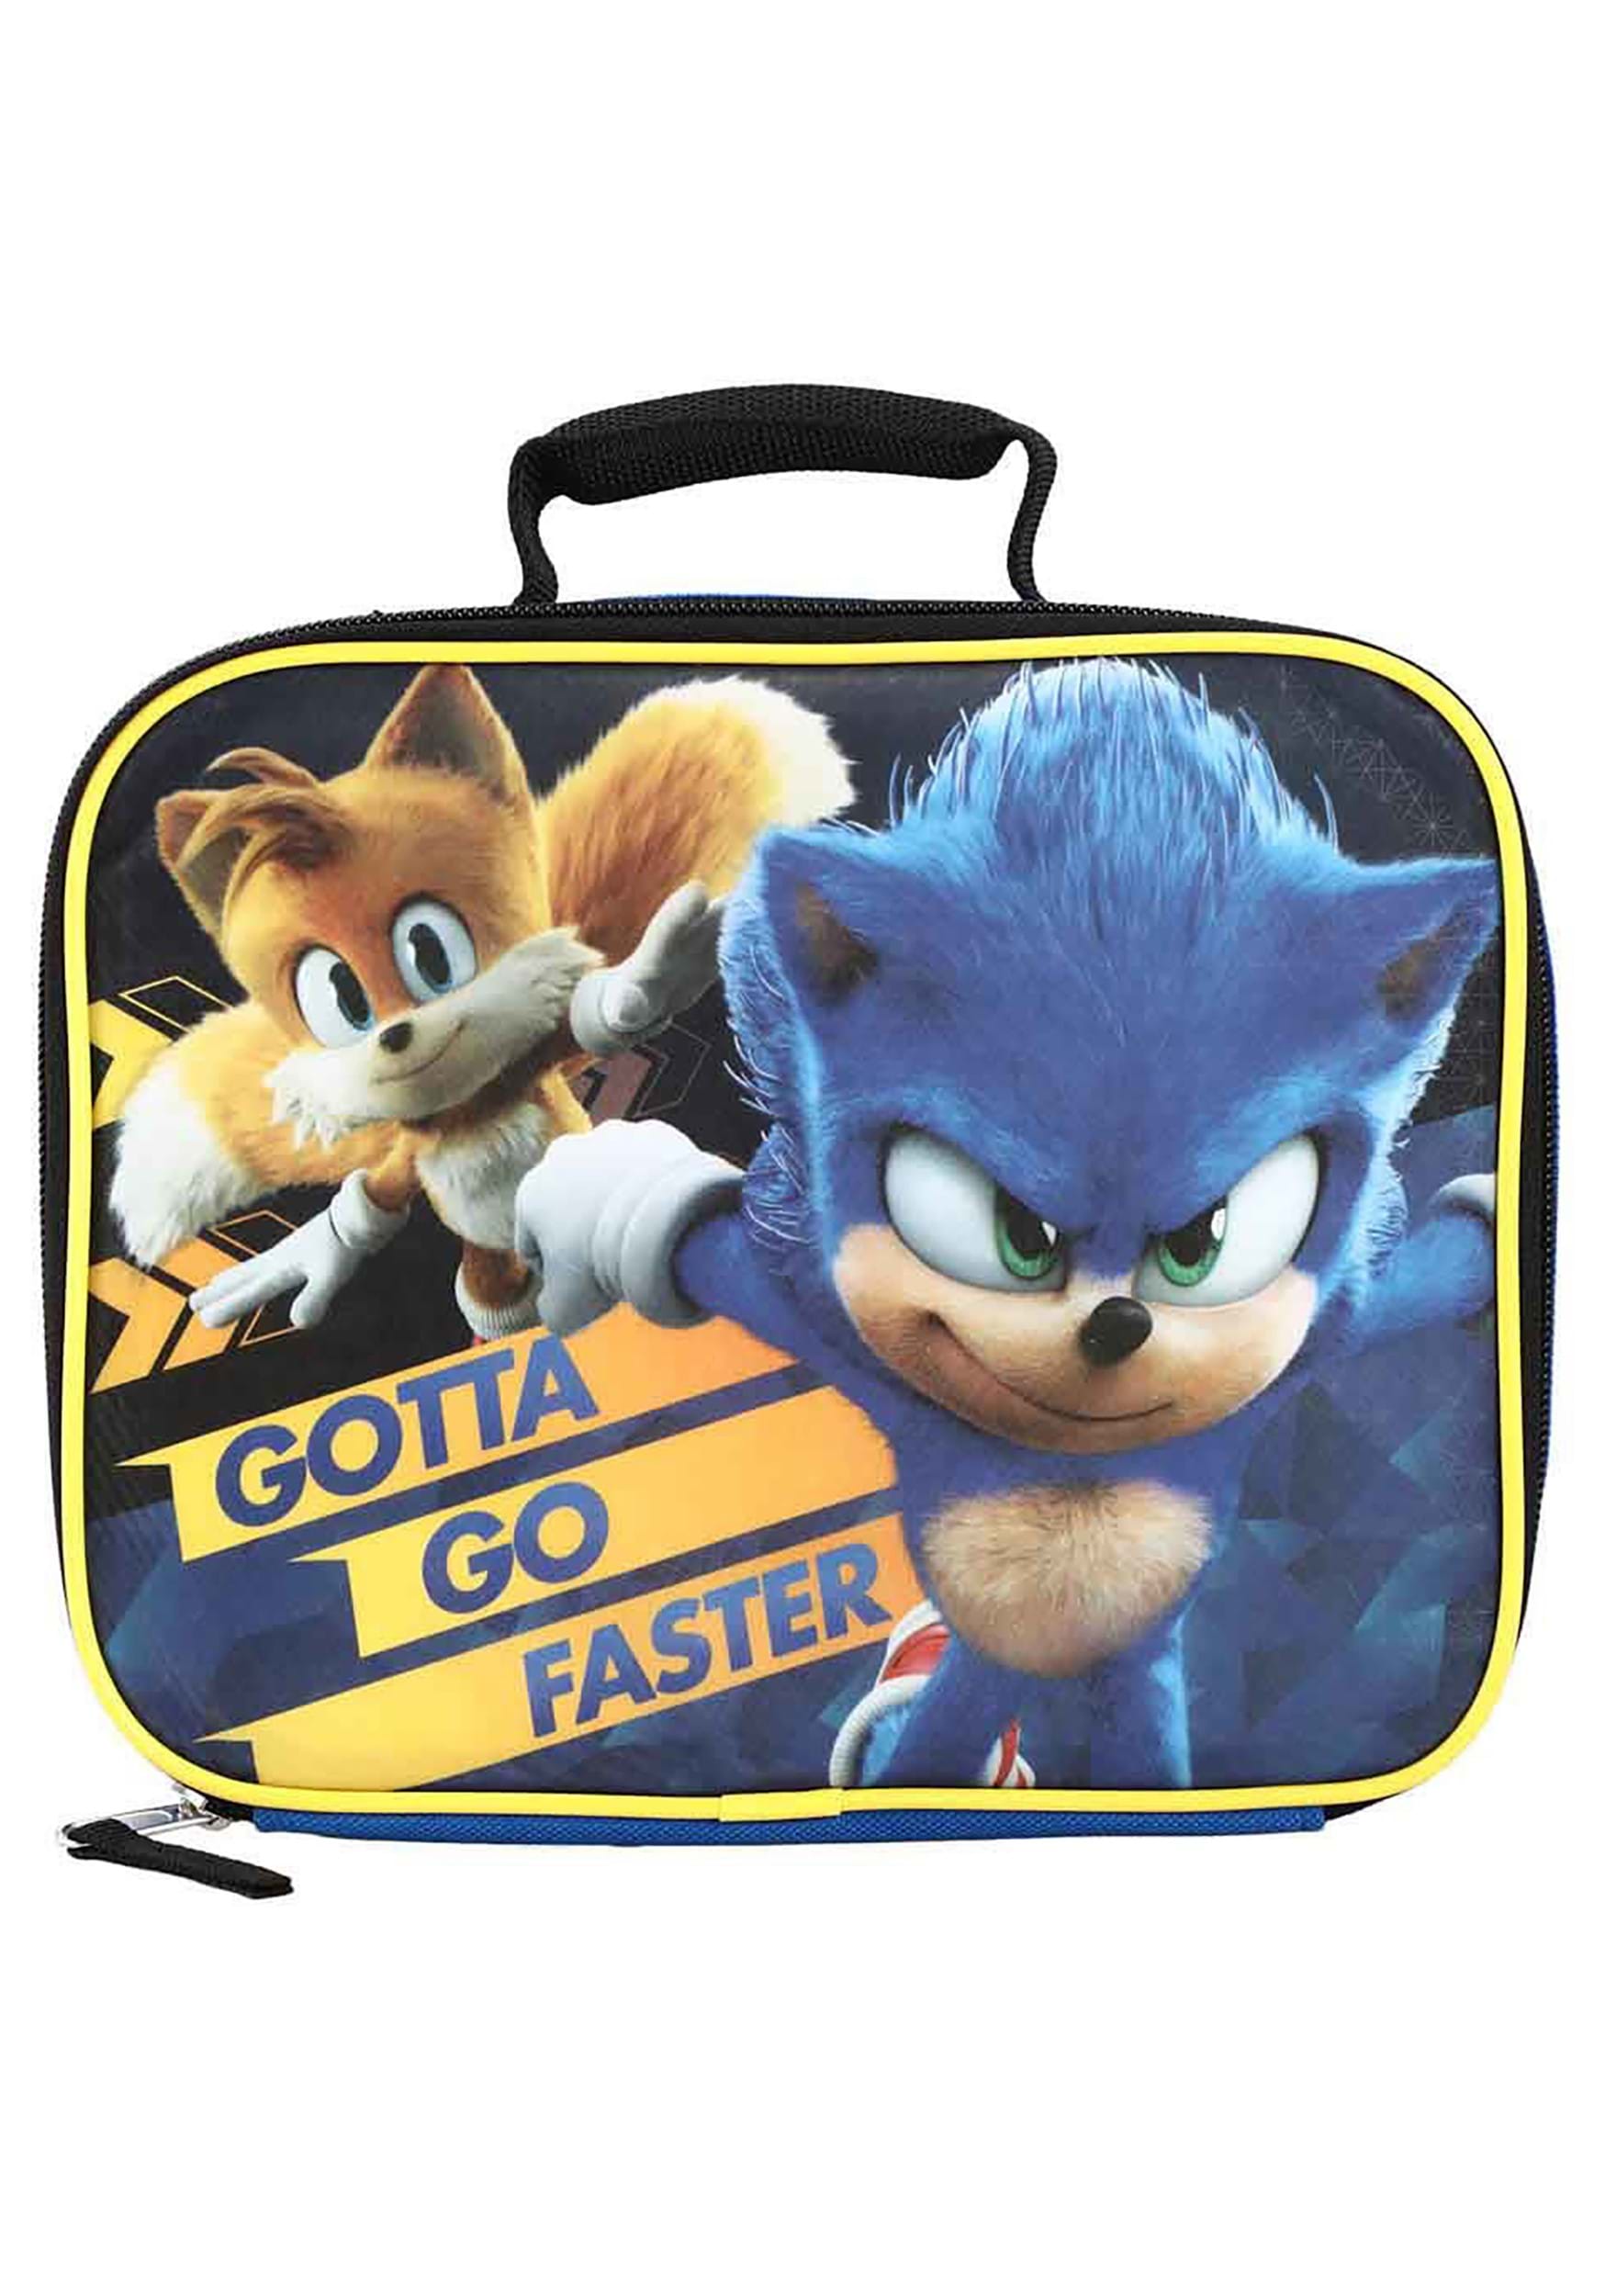 https://images.fun.com/products/86225/1-1/sonic-2-gotta-go-faster-lunch-tote.jpg